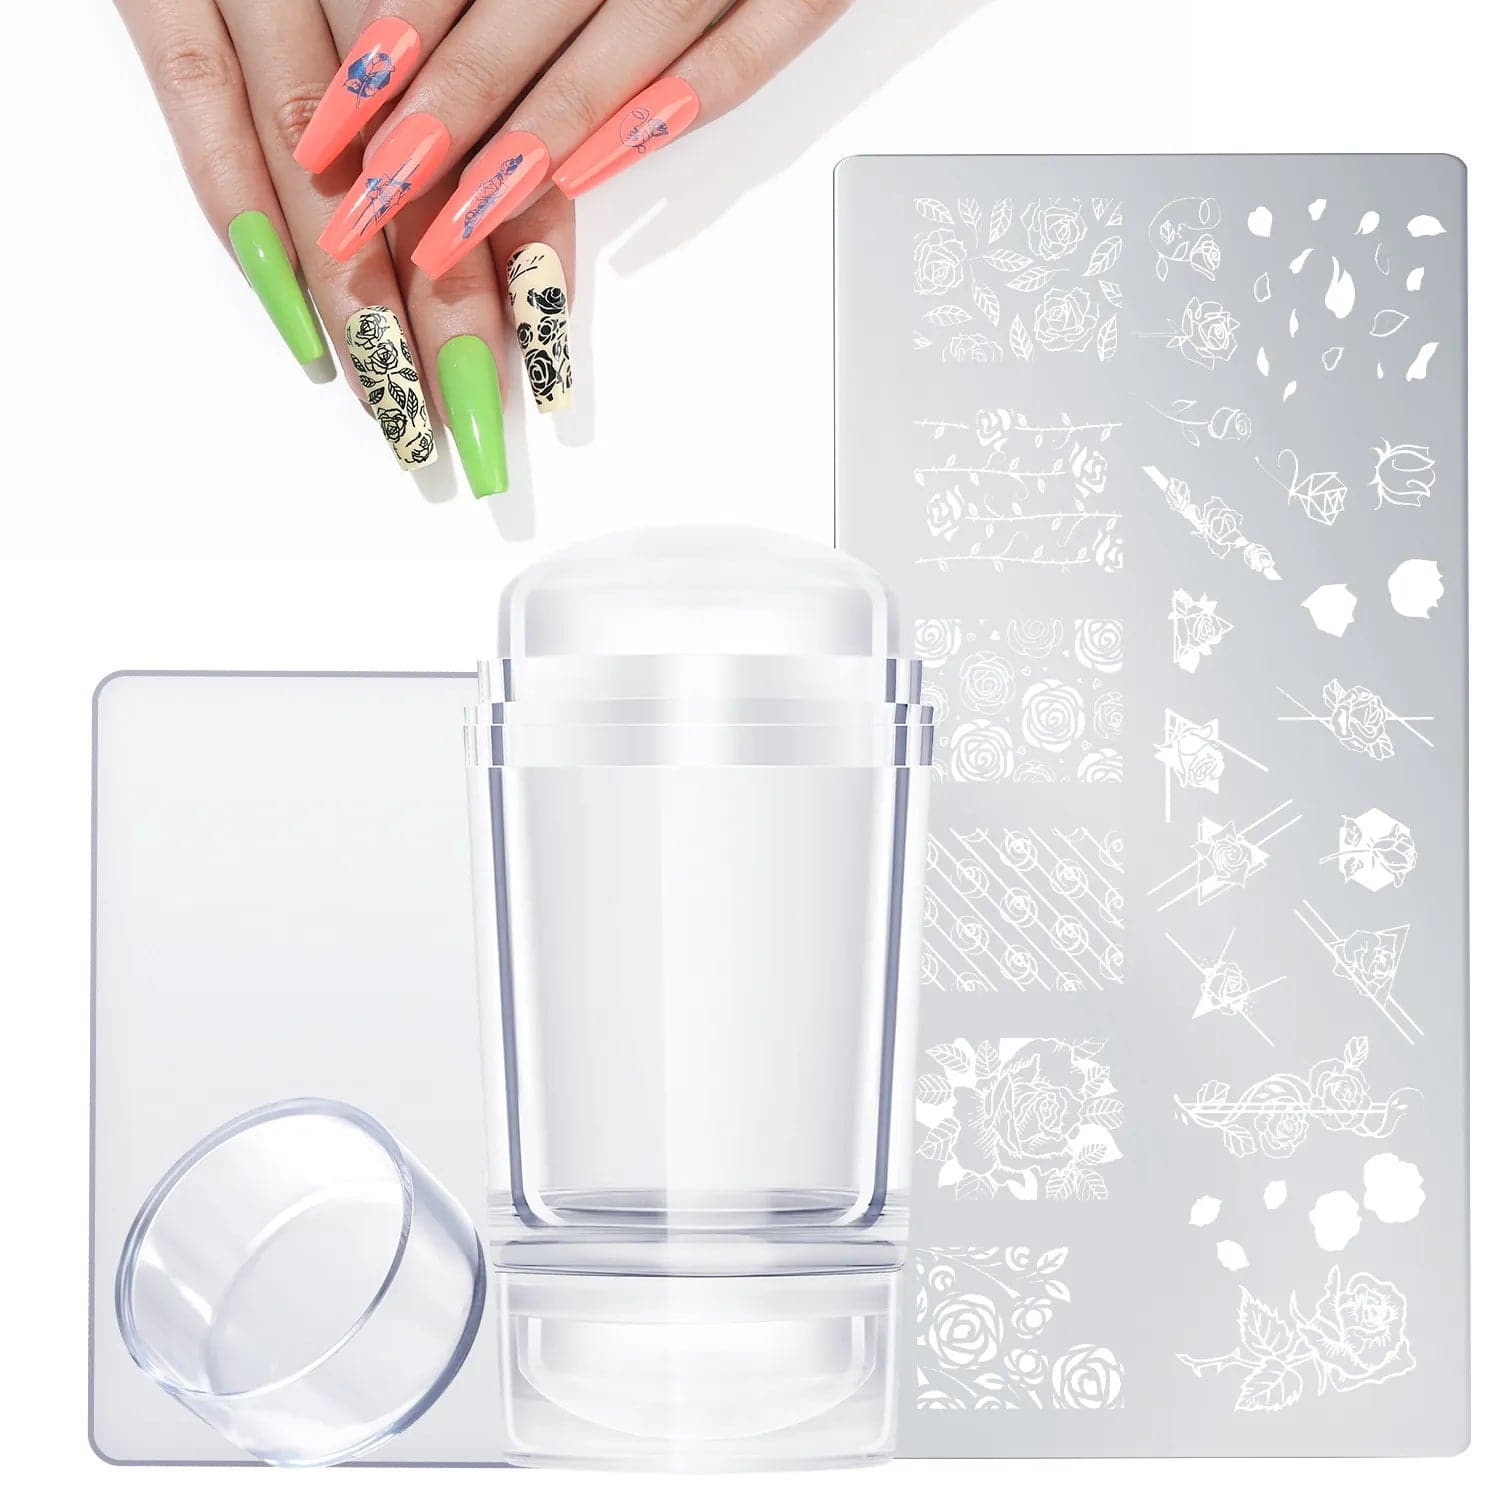 Flower Fragrance - Nail Stamping Plates